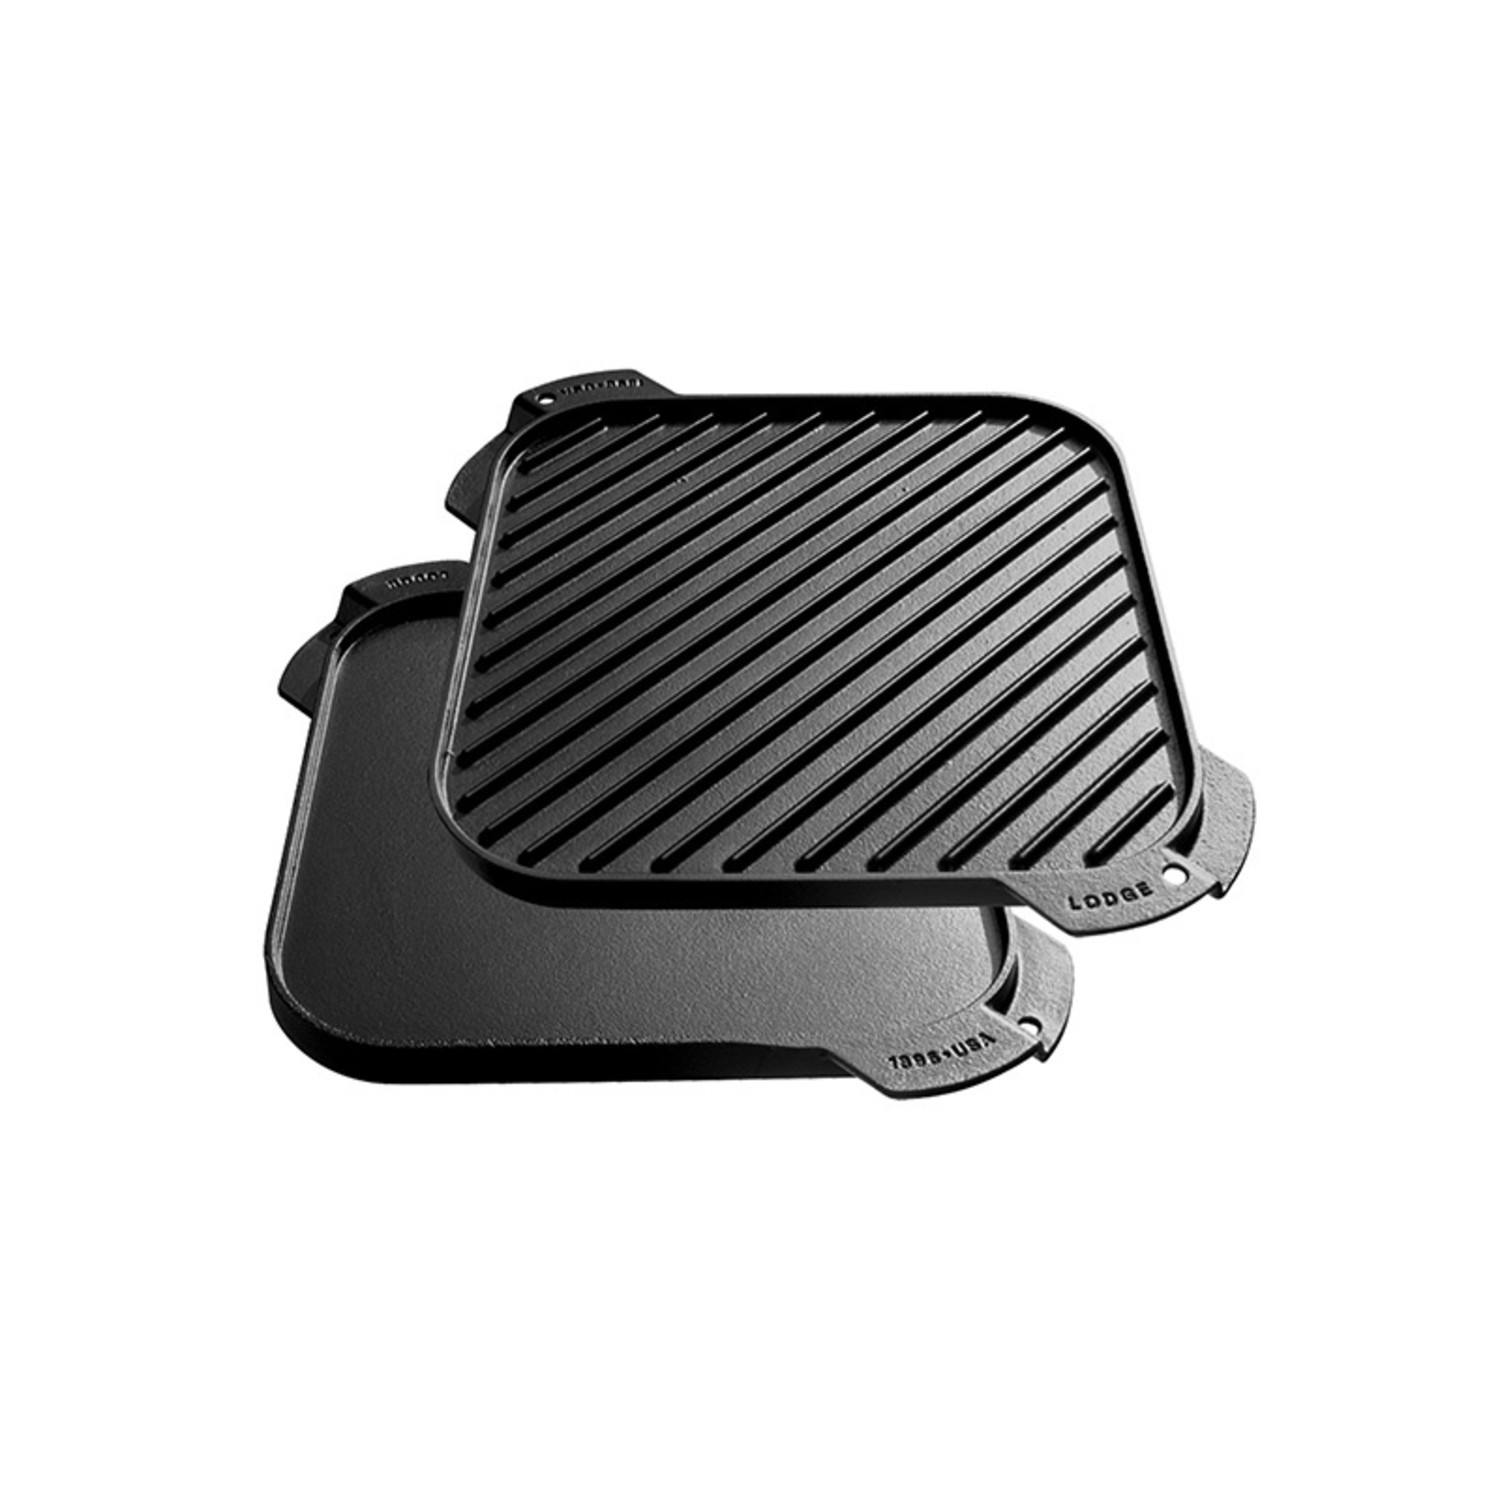 Lodge Chef Collection Seasoned Cast Iron Double Burner Reversible Grill/ Griddle + Reviews